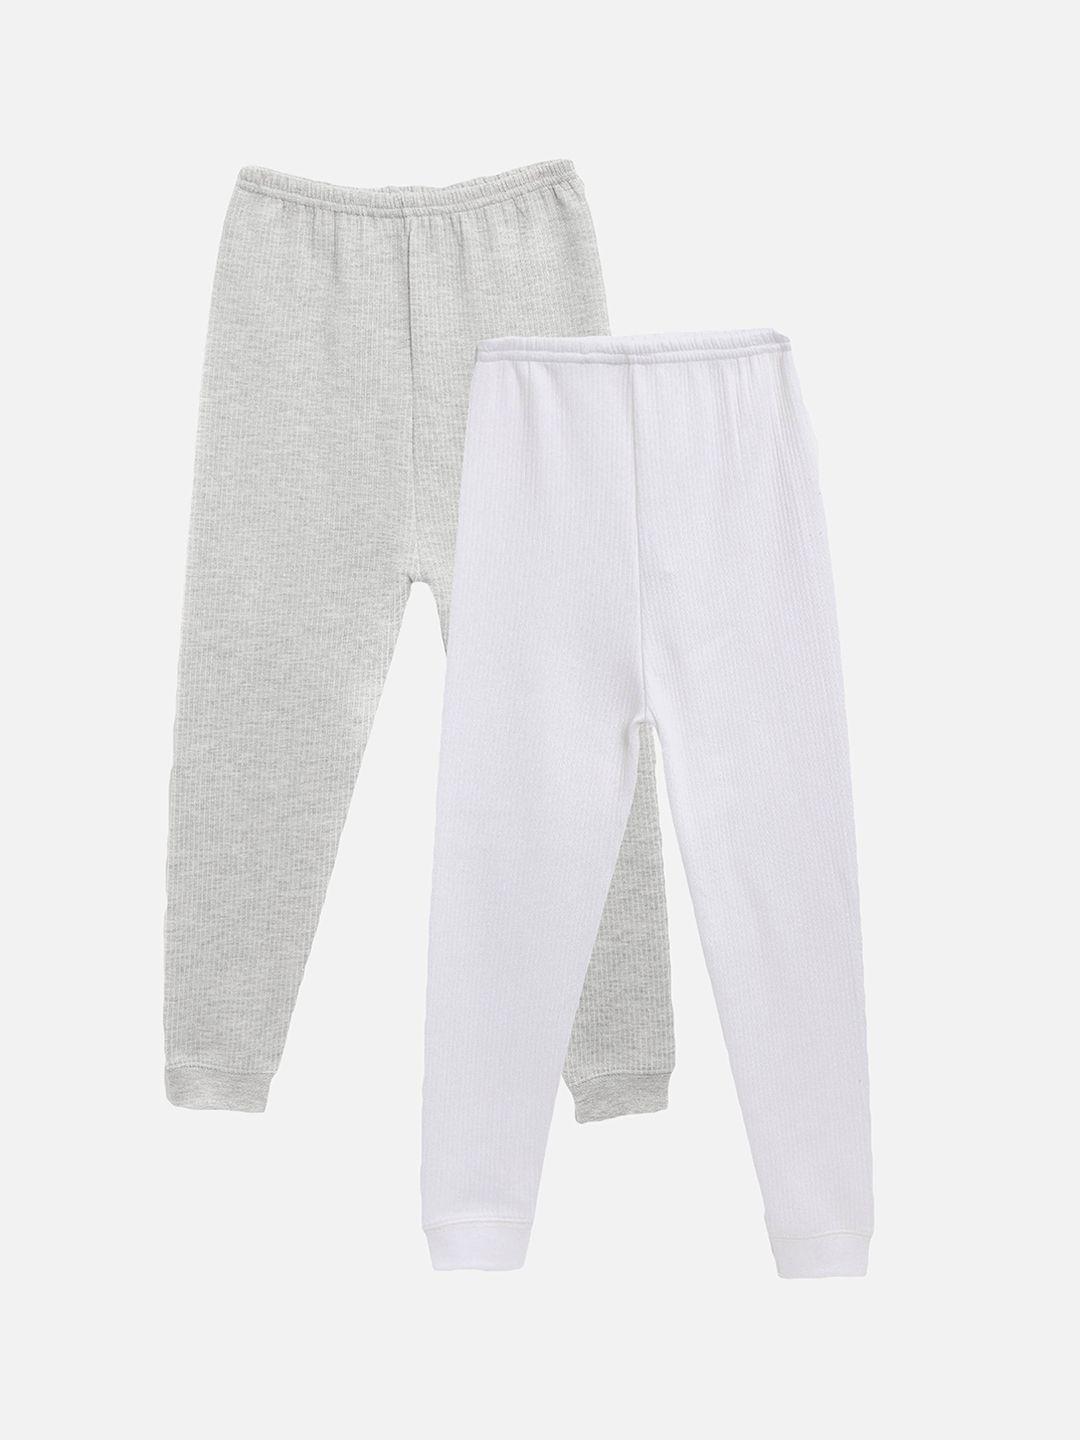 kanvin boys pack of 2 white & grey solid thermal bottoms